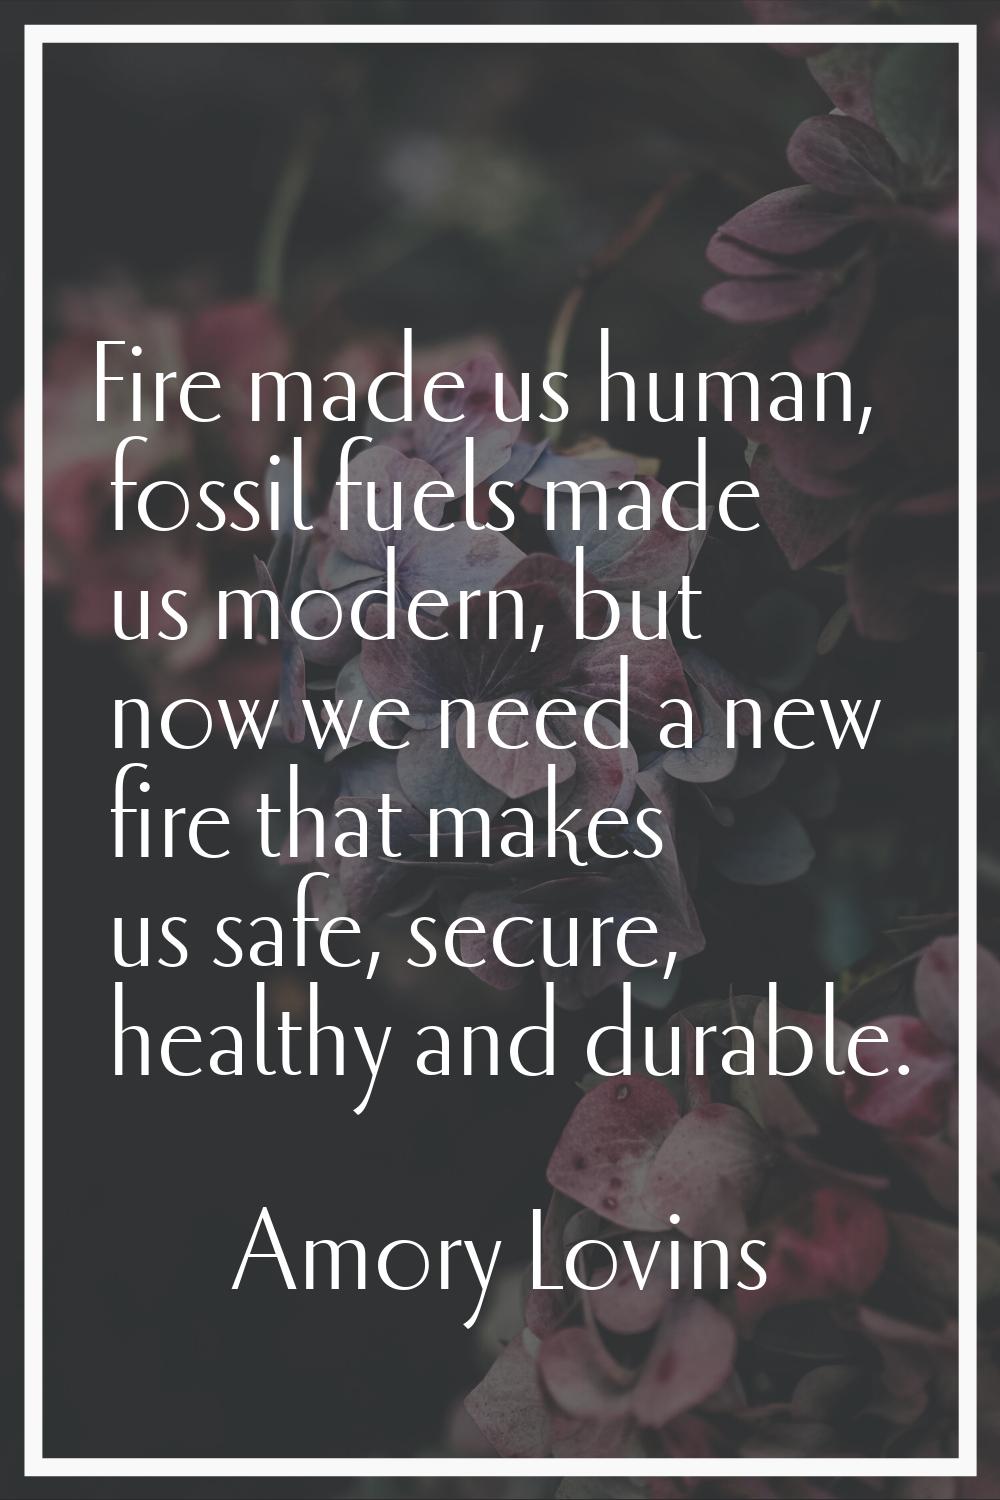 Fire made us human, fossil fuels made us modern, but now we need a new fire that makes us safe, sec